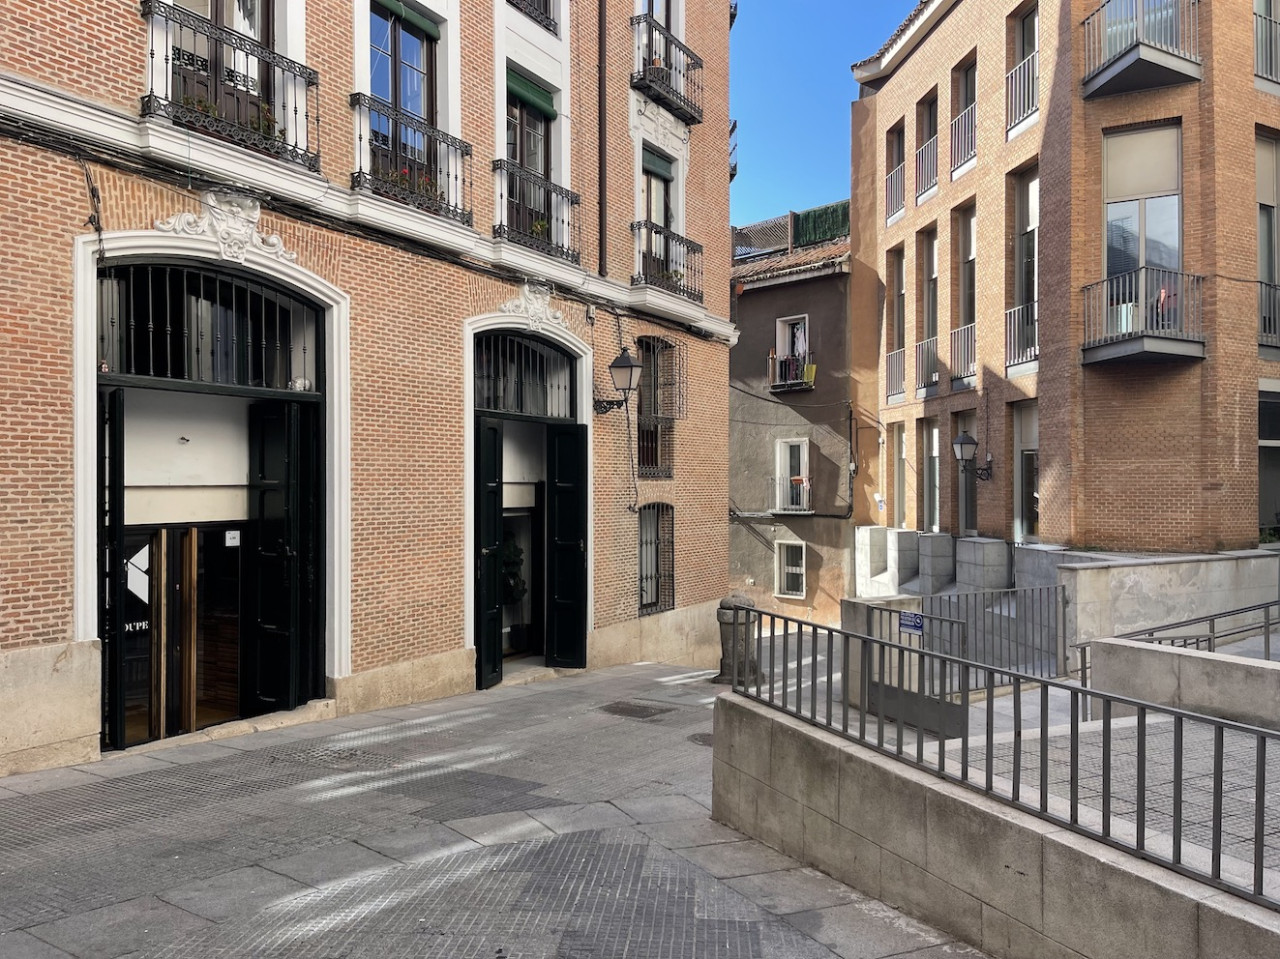 plush74 location scout rental spain photo film production madrid streets12